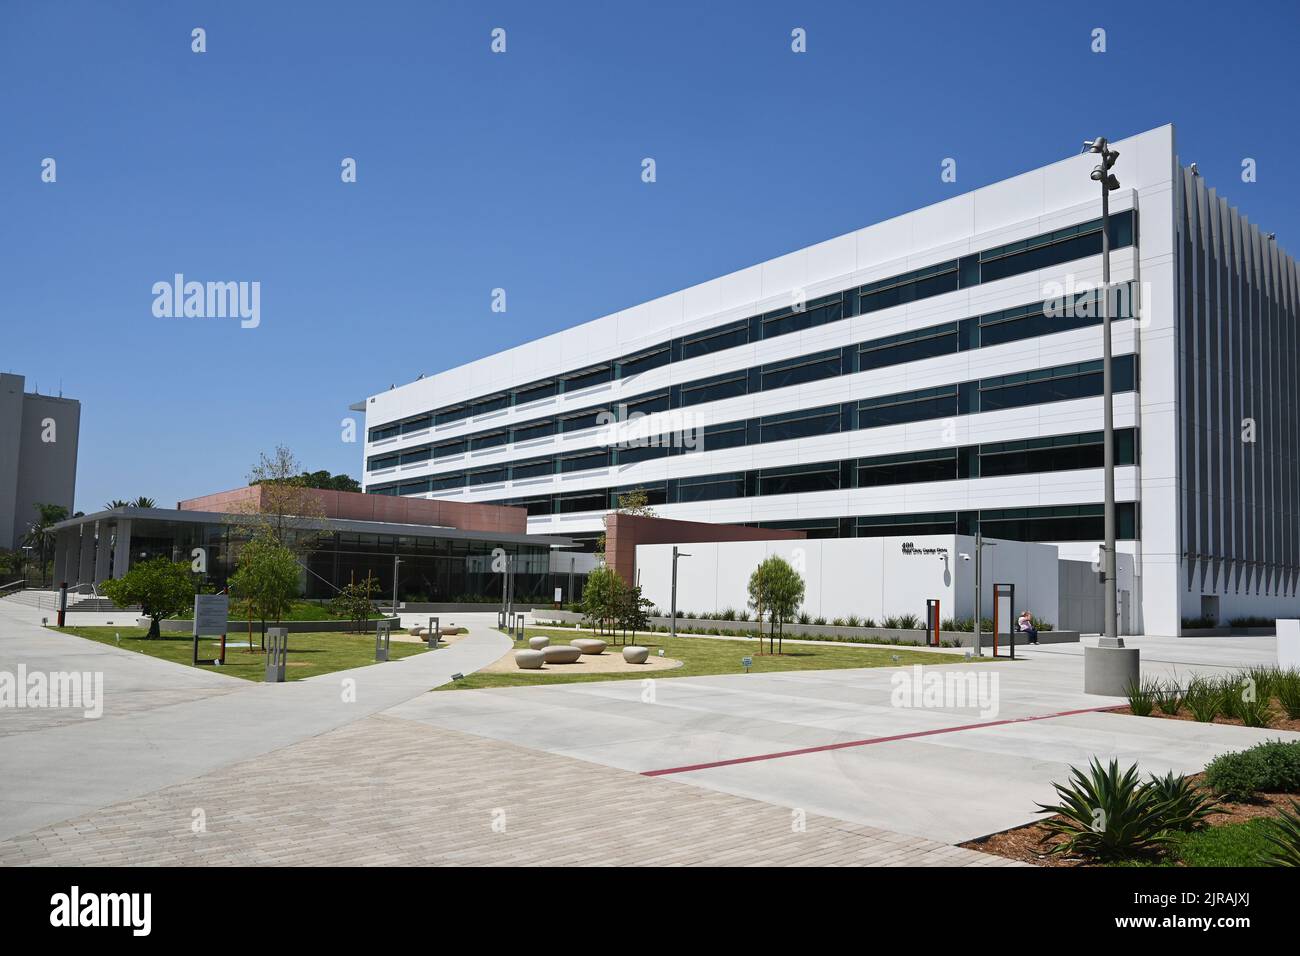 SANTA ANA, CALIFORNIA - 22 AUG 2022: The Orange County Hall of Administration building in the Civic Center area of Downtown Santa Ana. Stock Photo